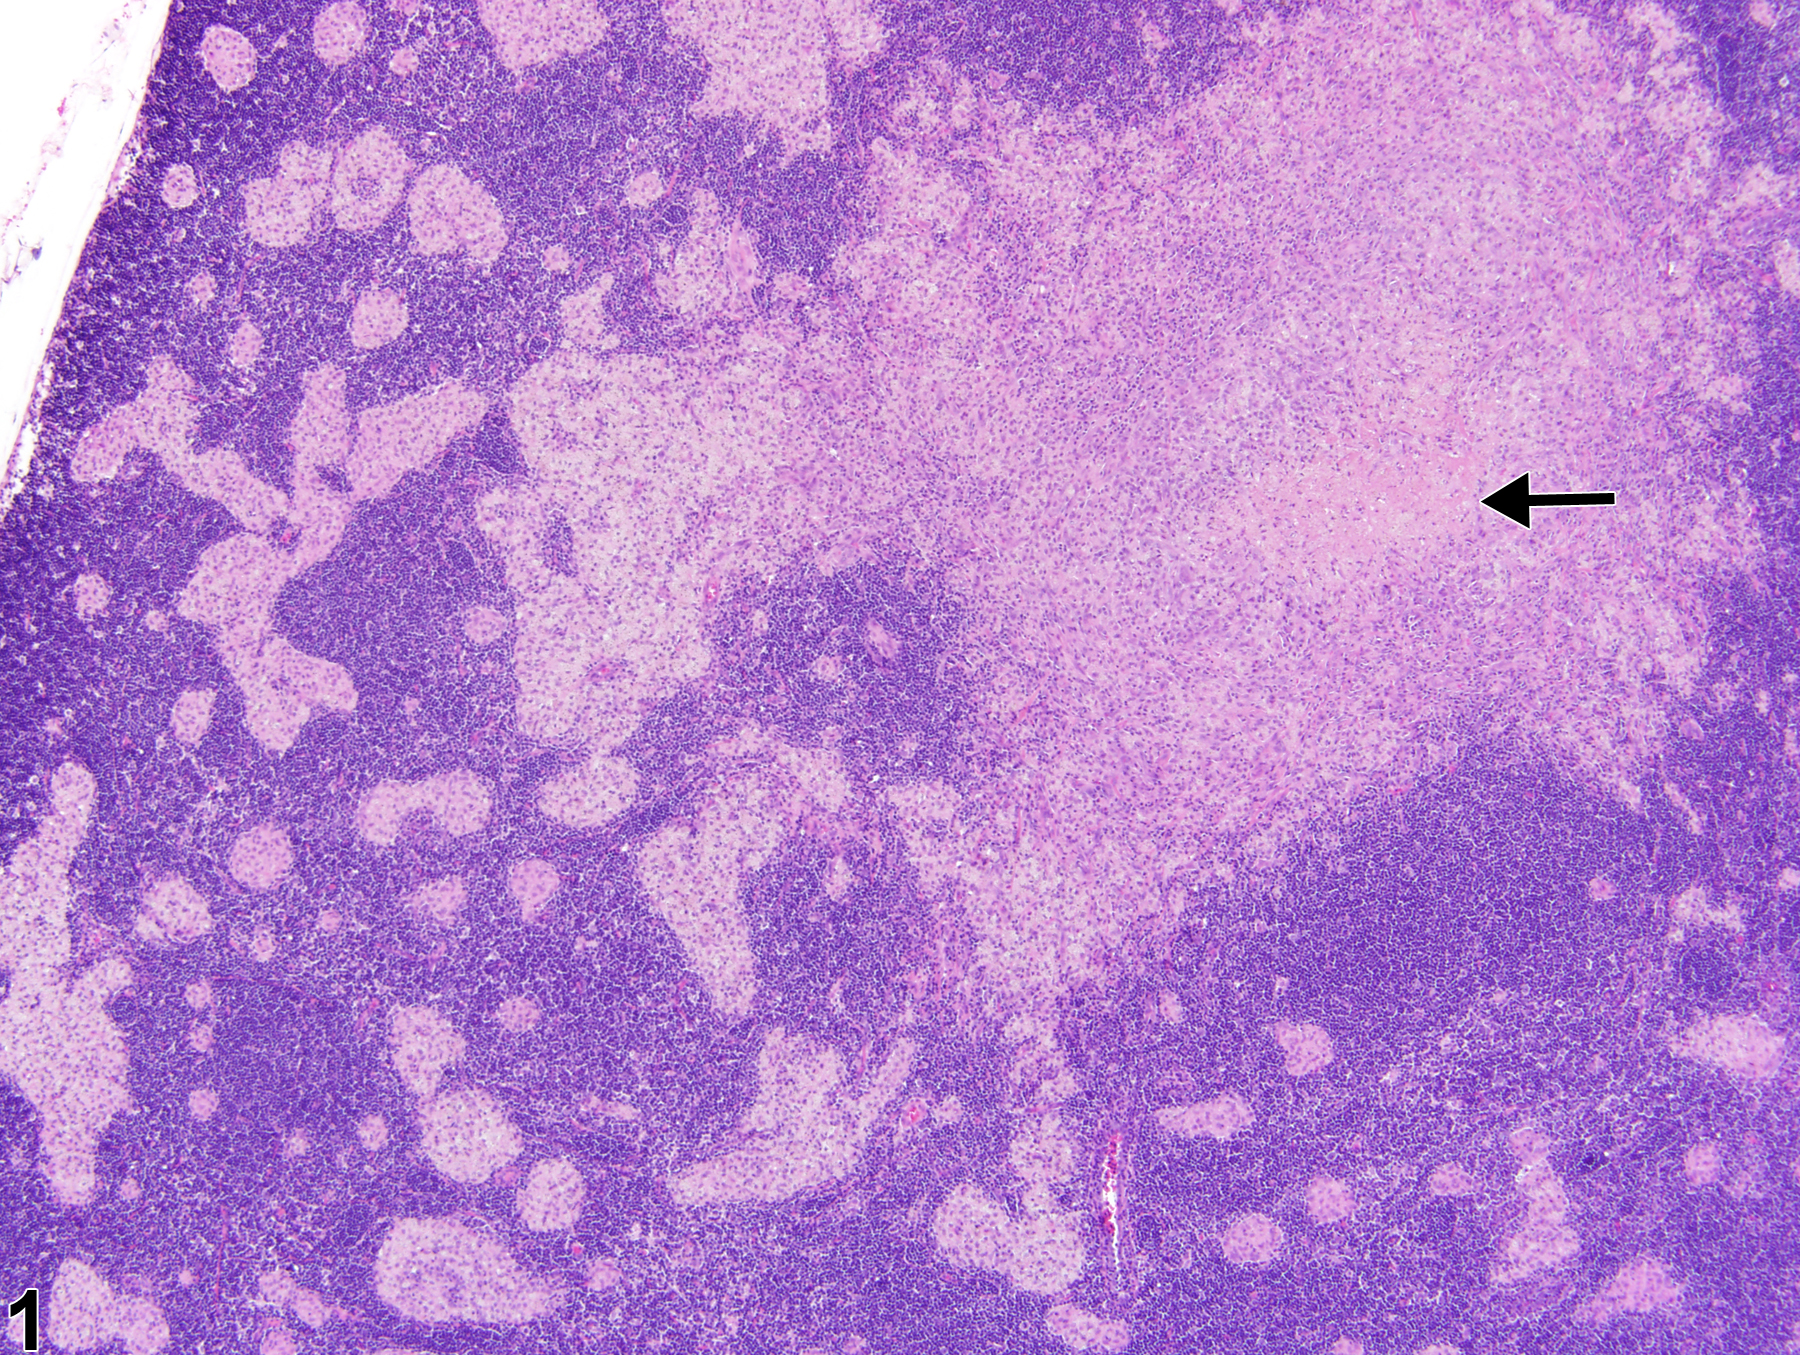 Image of necrosis in the lymph node from a male Harlan Sprague-Dawley rat in a subchronic study